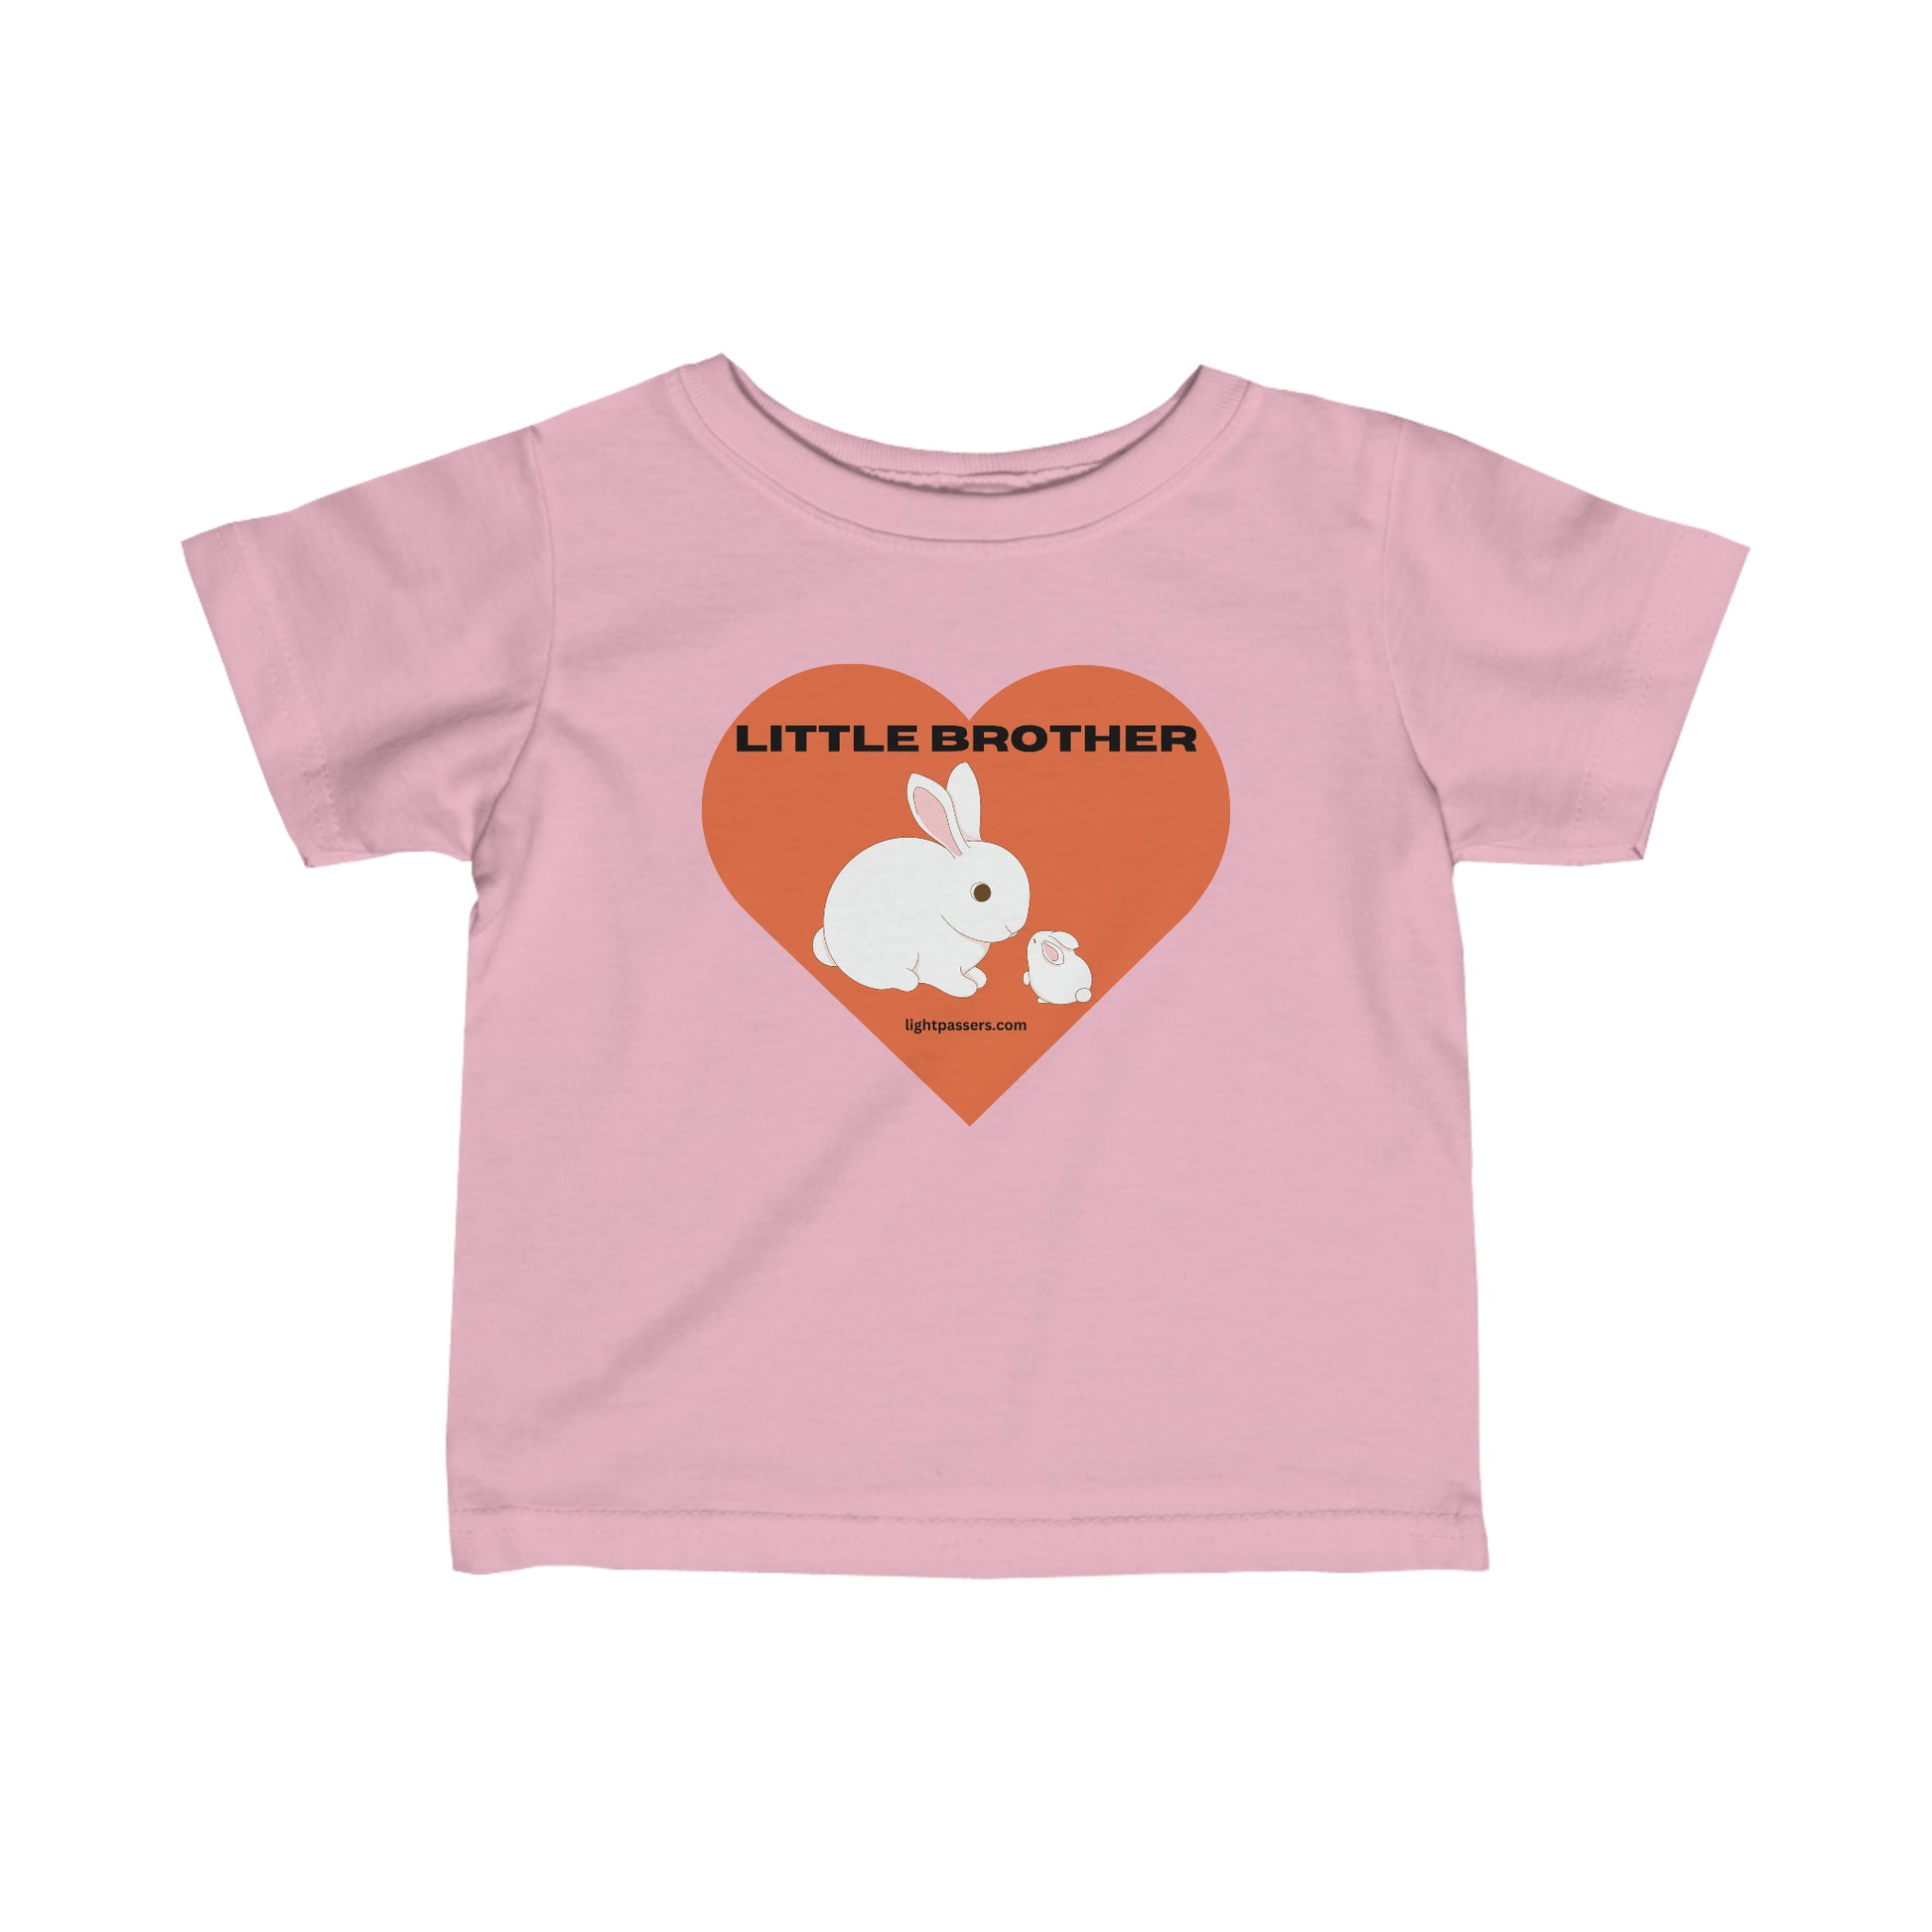 Infant fine jersey tee with a rabbit and heart design, featuring ribbed knitting for durability and taped shoulders for a comfy fit. Little Brother Baby T-shirt for younglings.